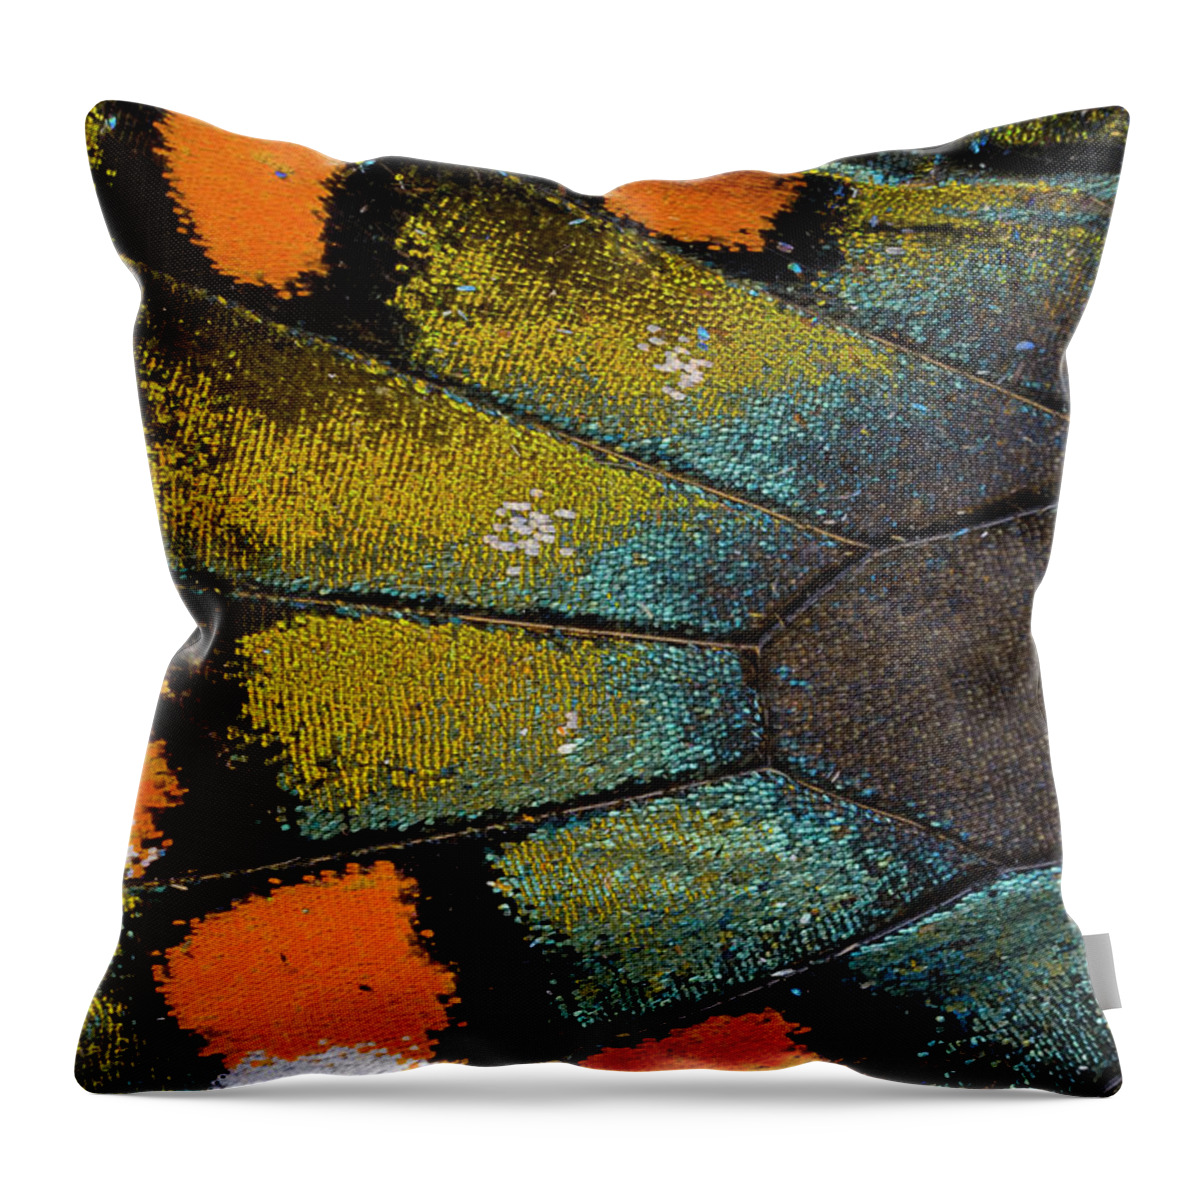 Natural Pattern Throw Pillow featuring the photograph Spicebush Swallowtail Butterfly Wing by Darrell Gulin